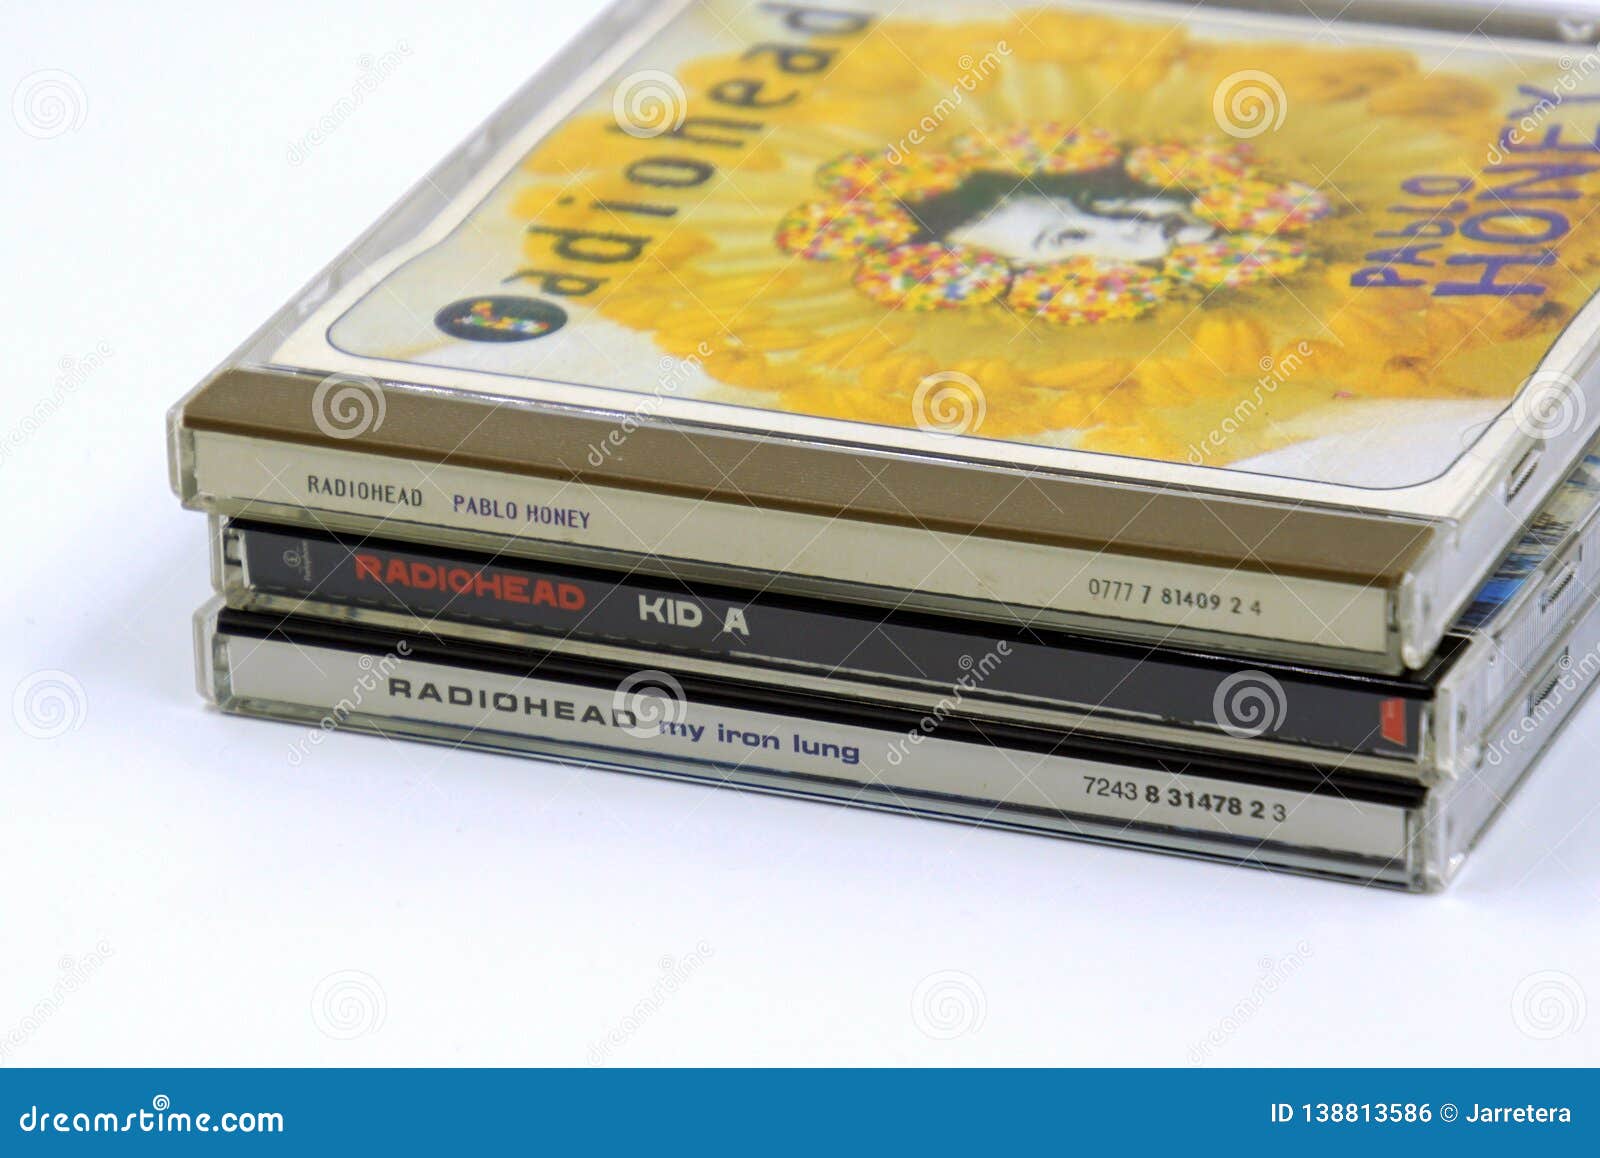 Compact Disc CD Albums from Radiohead. Editorial Photo - Image of album,  honey: 138813586